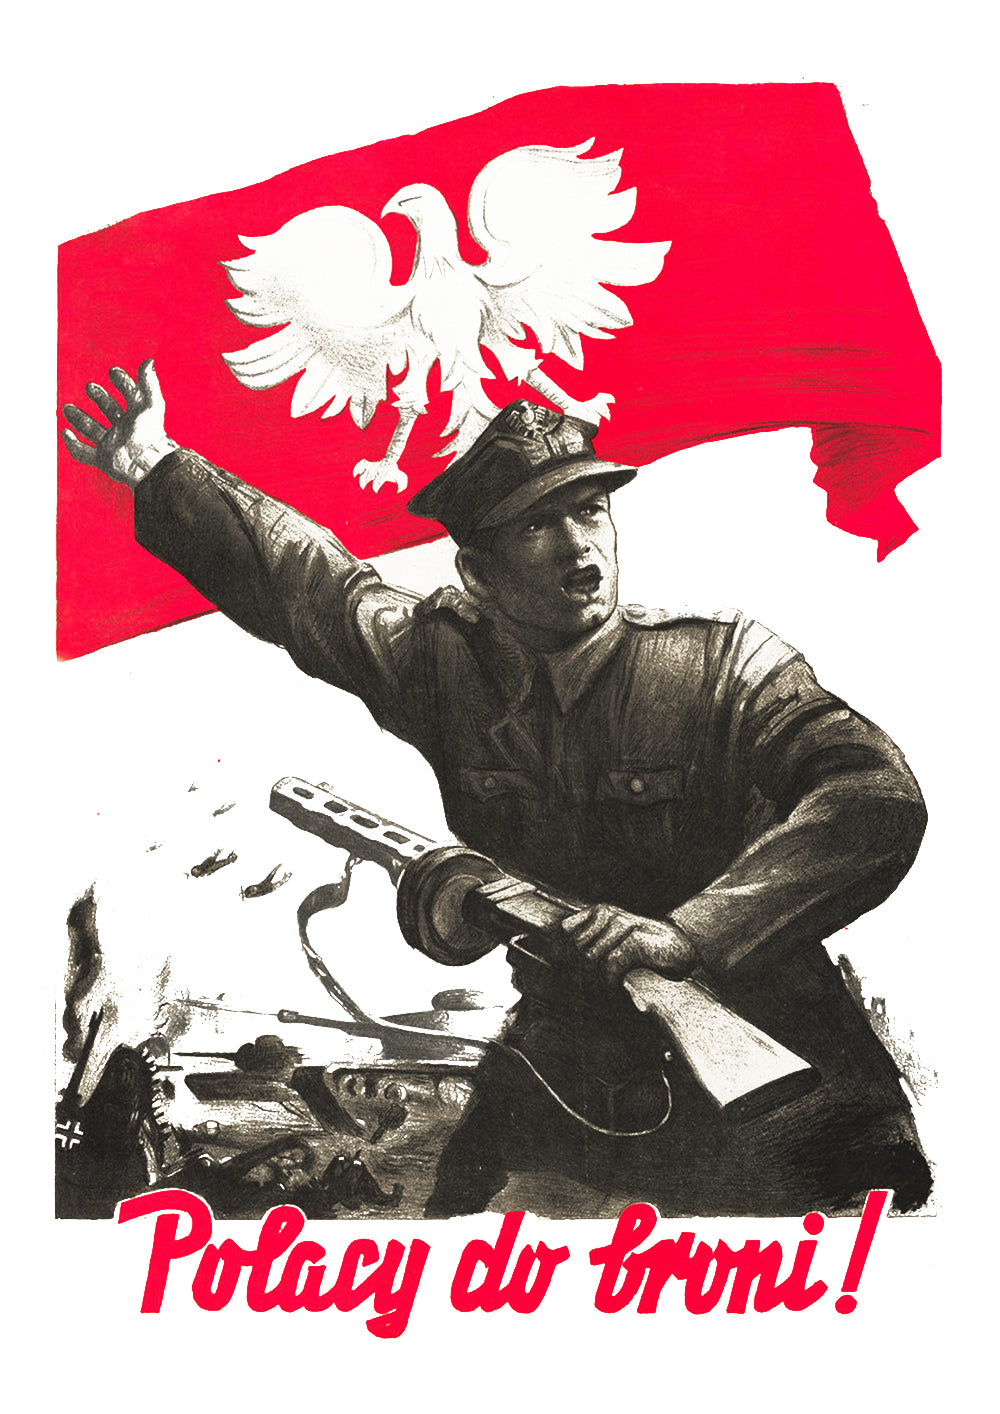 Poles to arms! – Polish World War Two poster